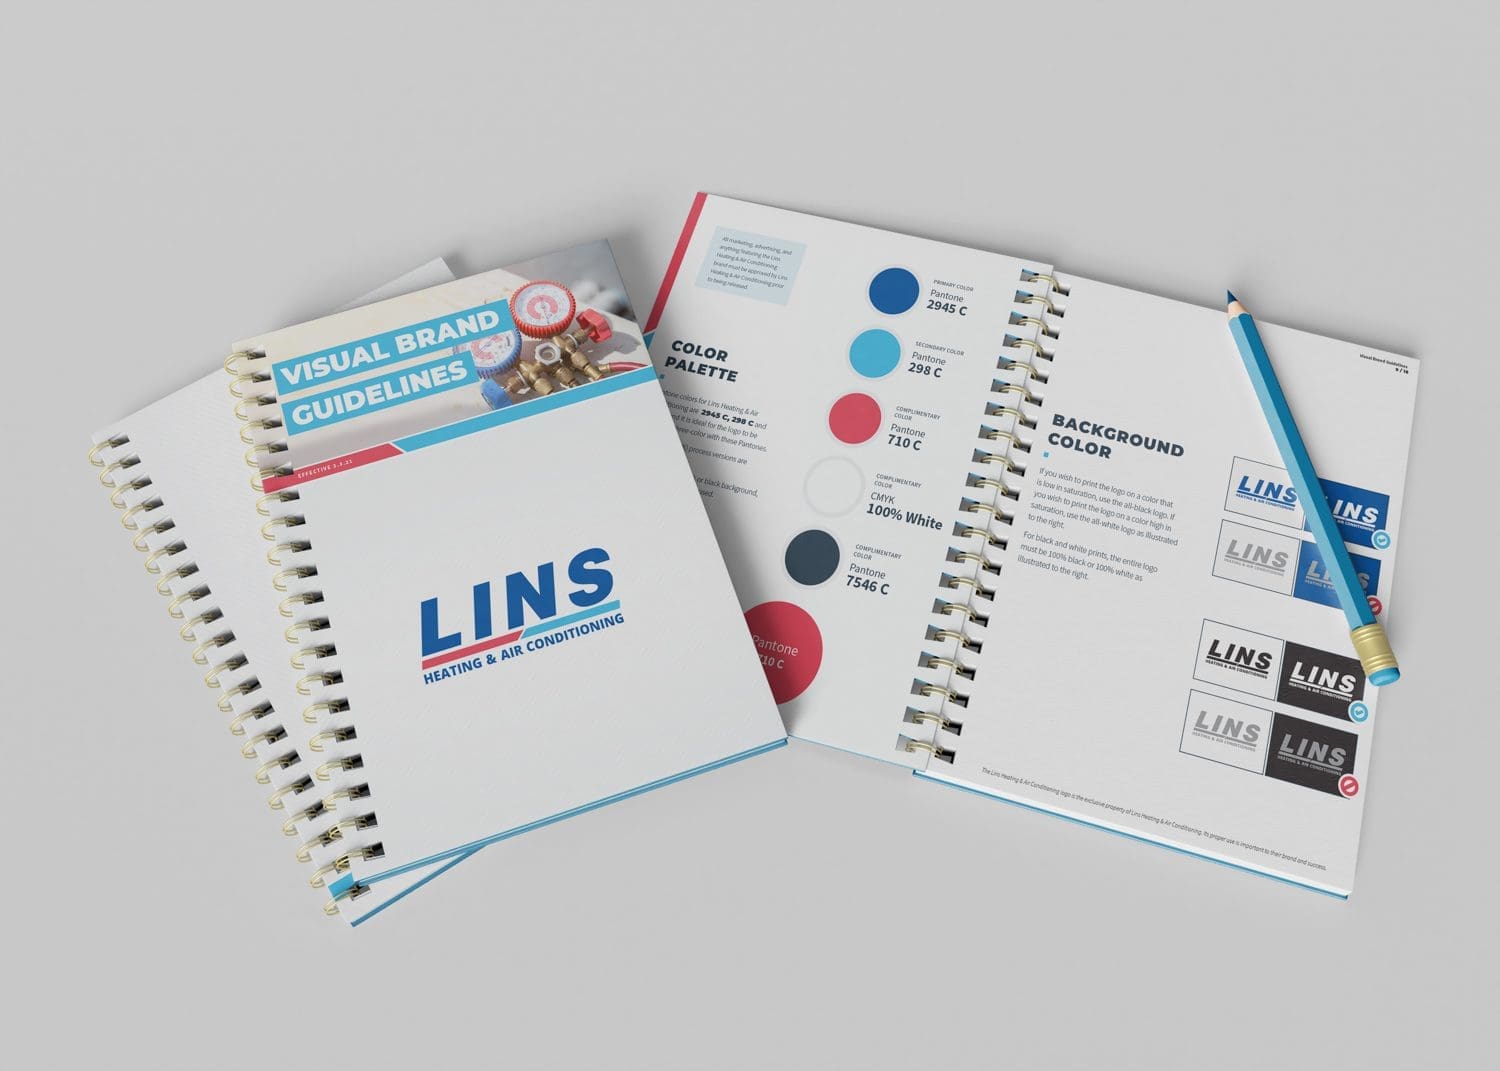 LINS Heating & Air Conditioning Branding Guidelines